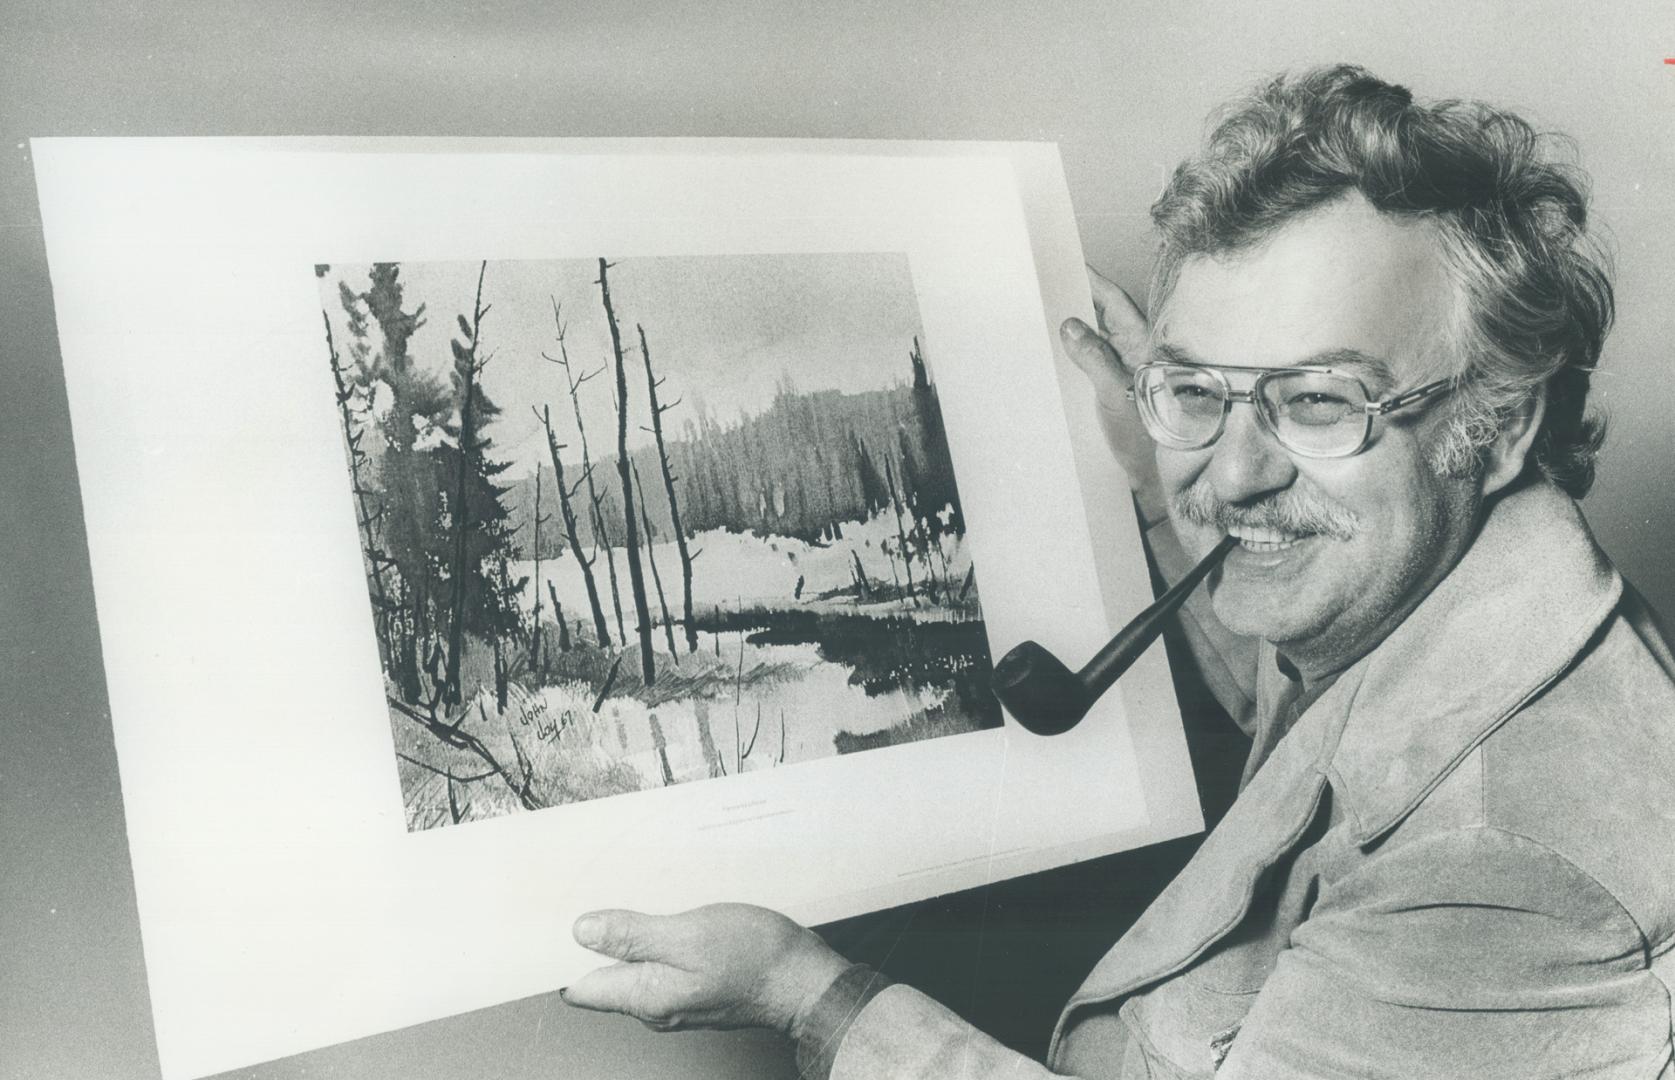 Willowdale artist John Joy began painting purely for pleasure and was fortunate enough to find success as a painter